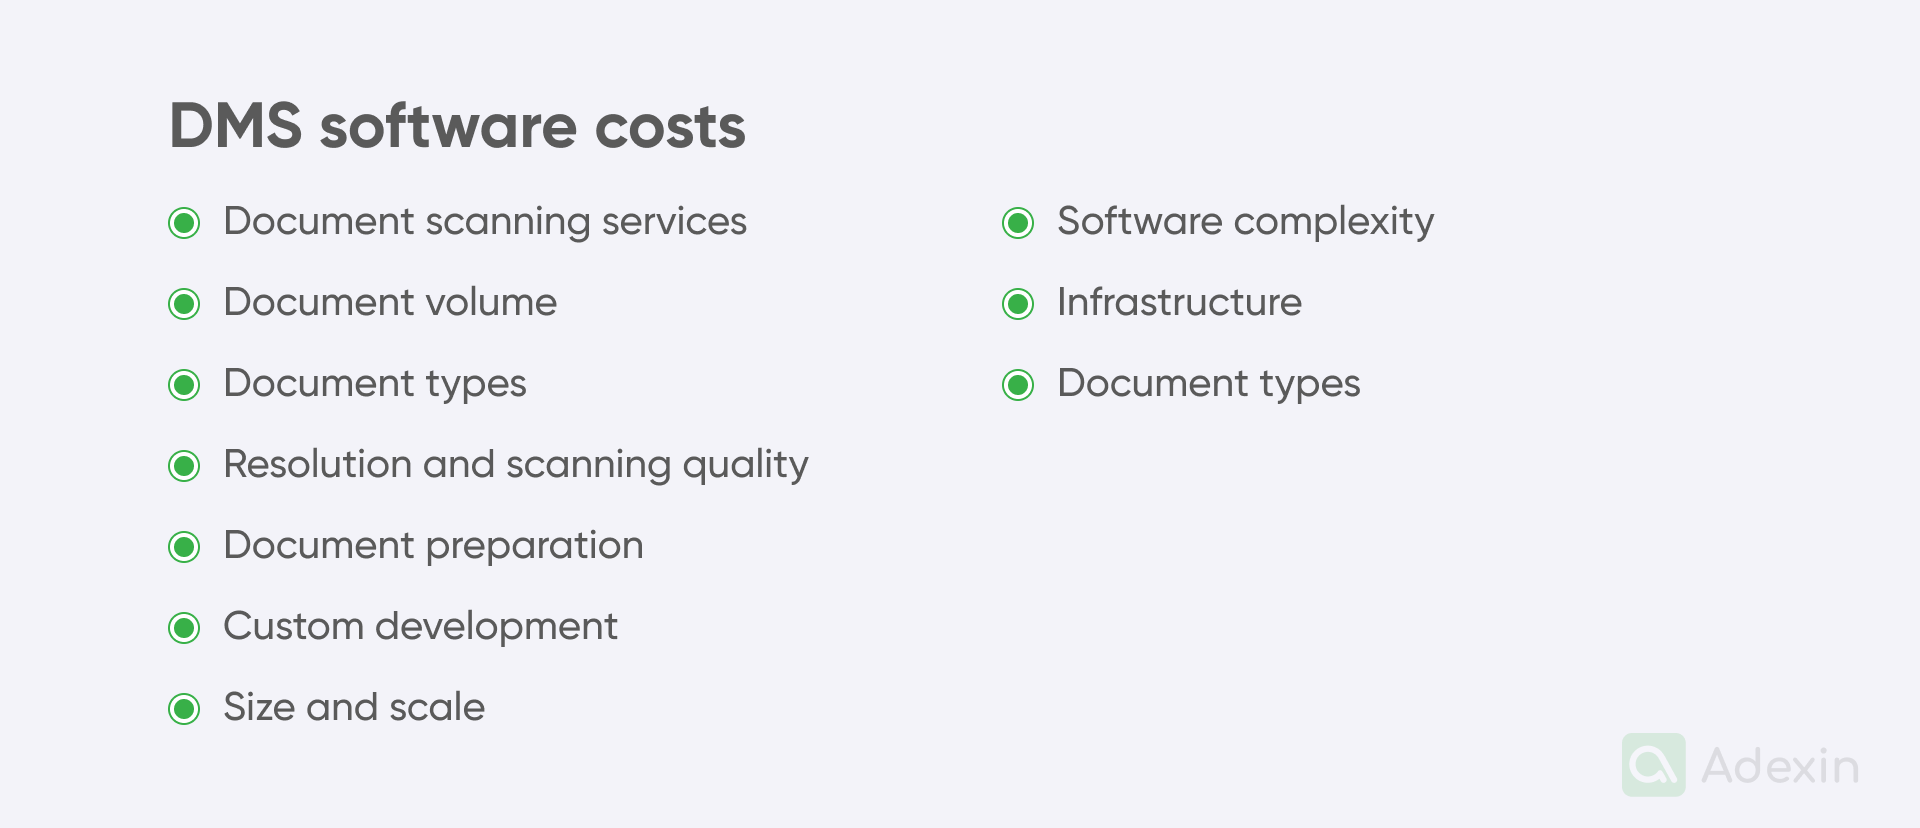 DMS software costs